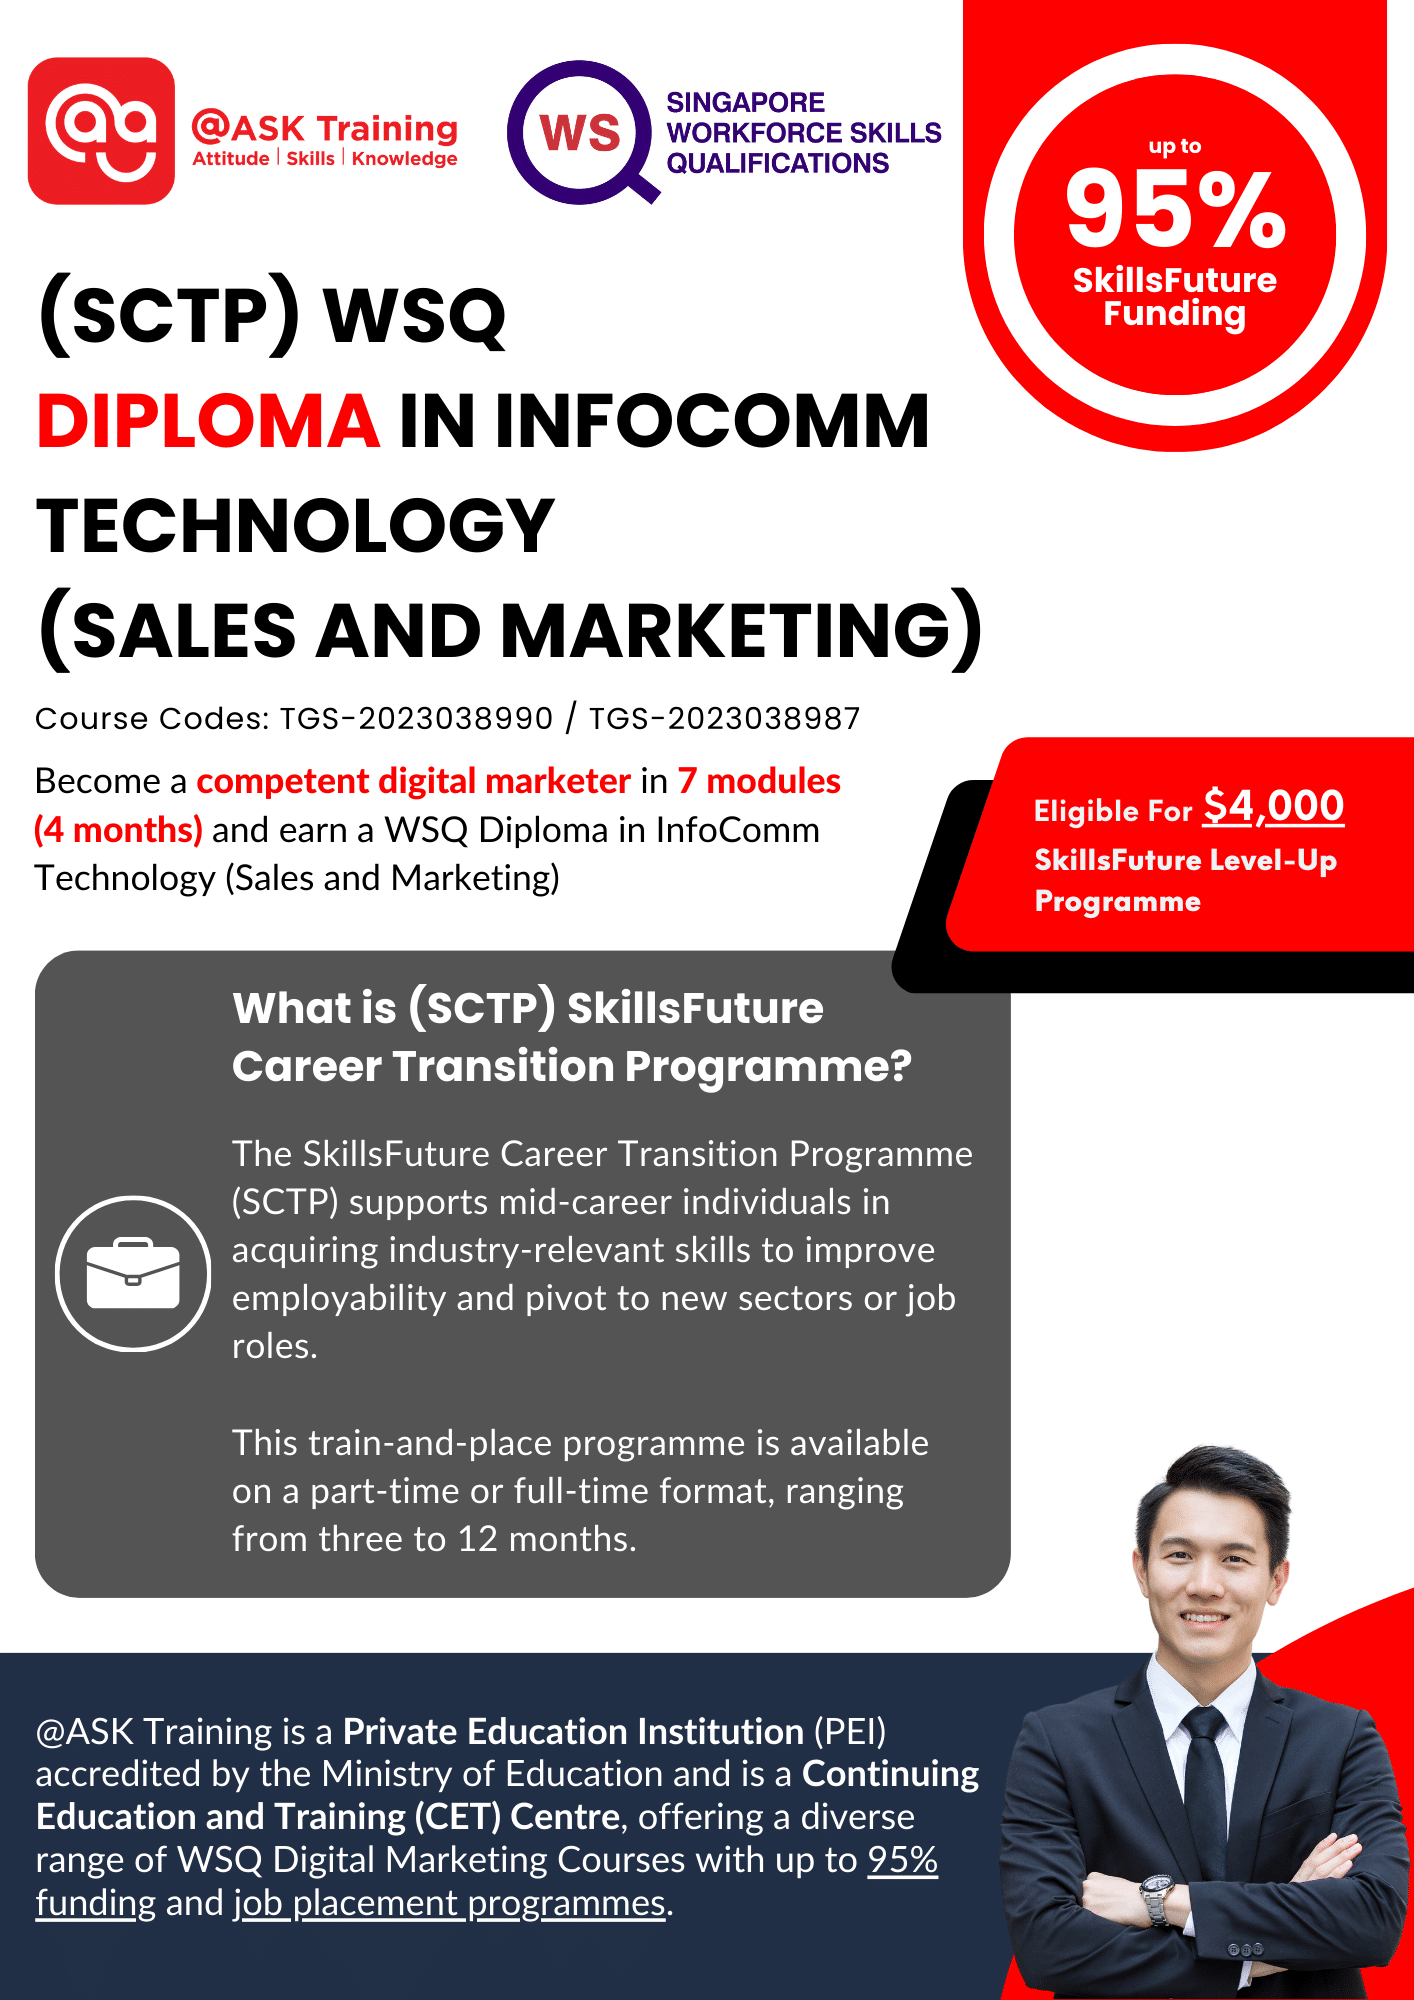 (SCTP) WSQ Diploma in Digital Marketing Course Brochure Cover